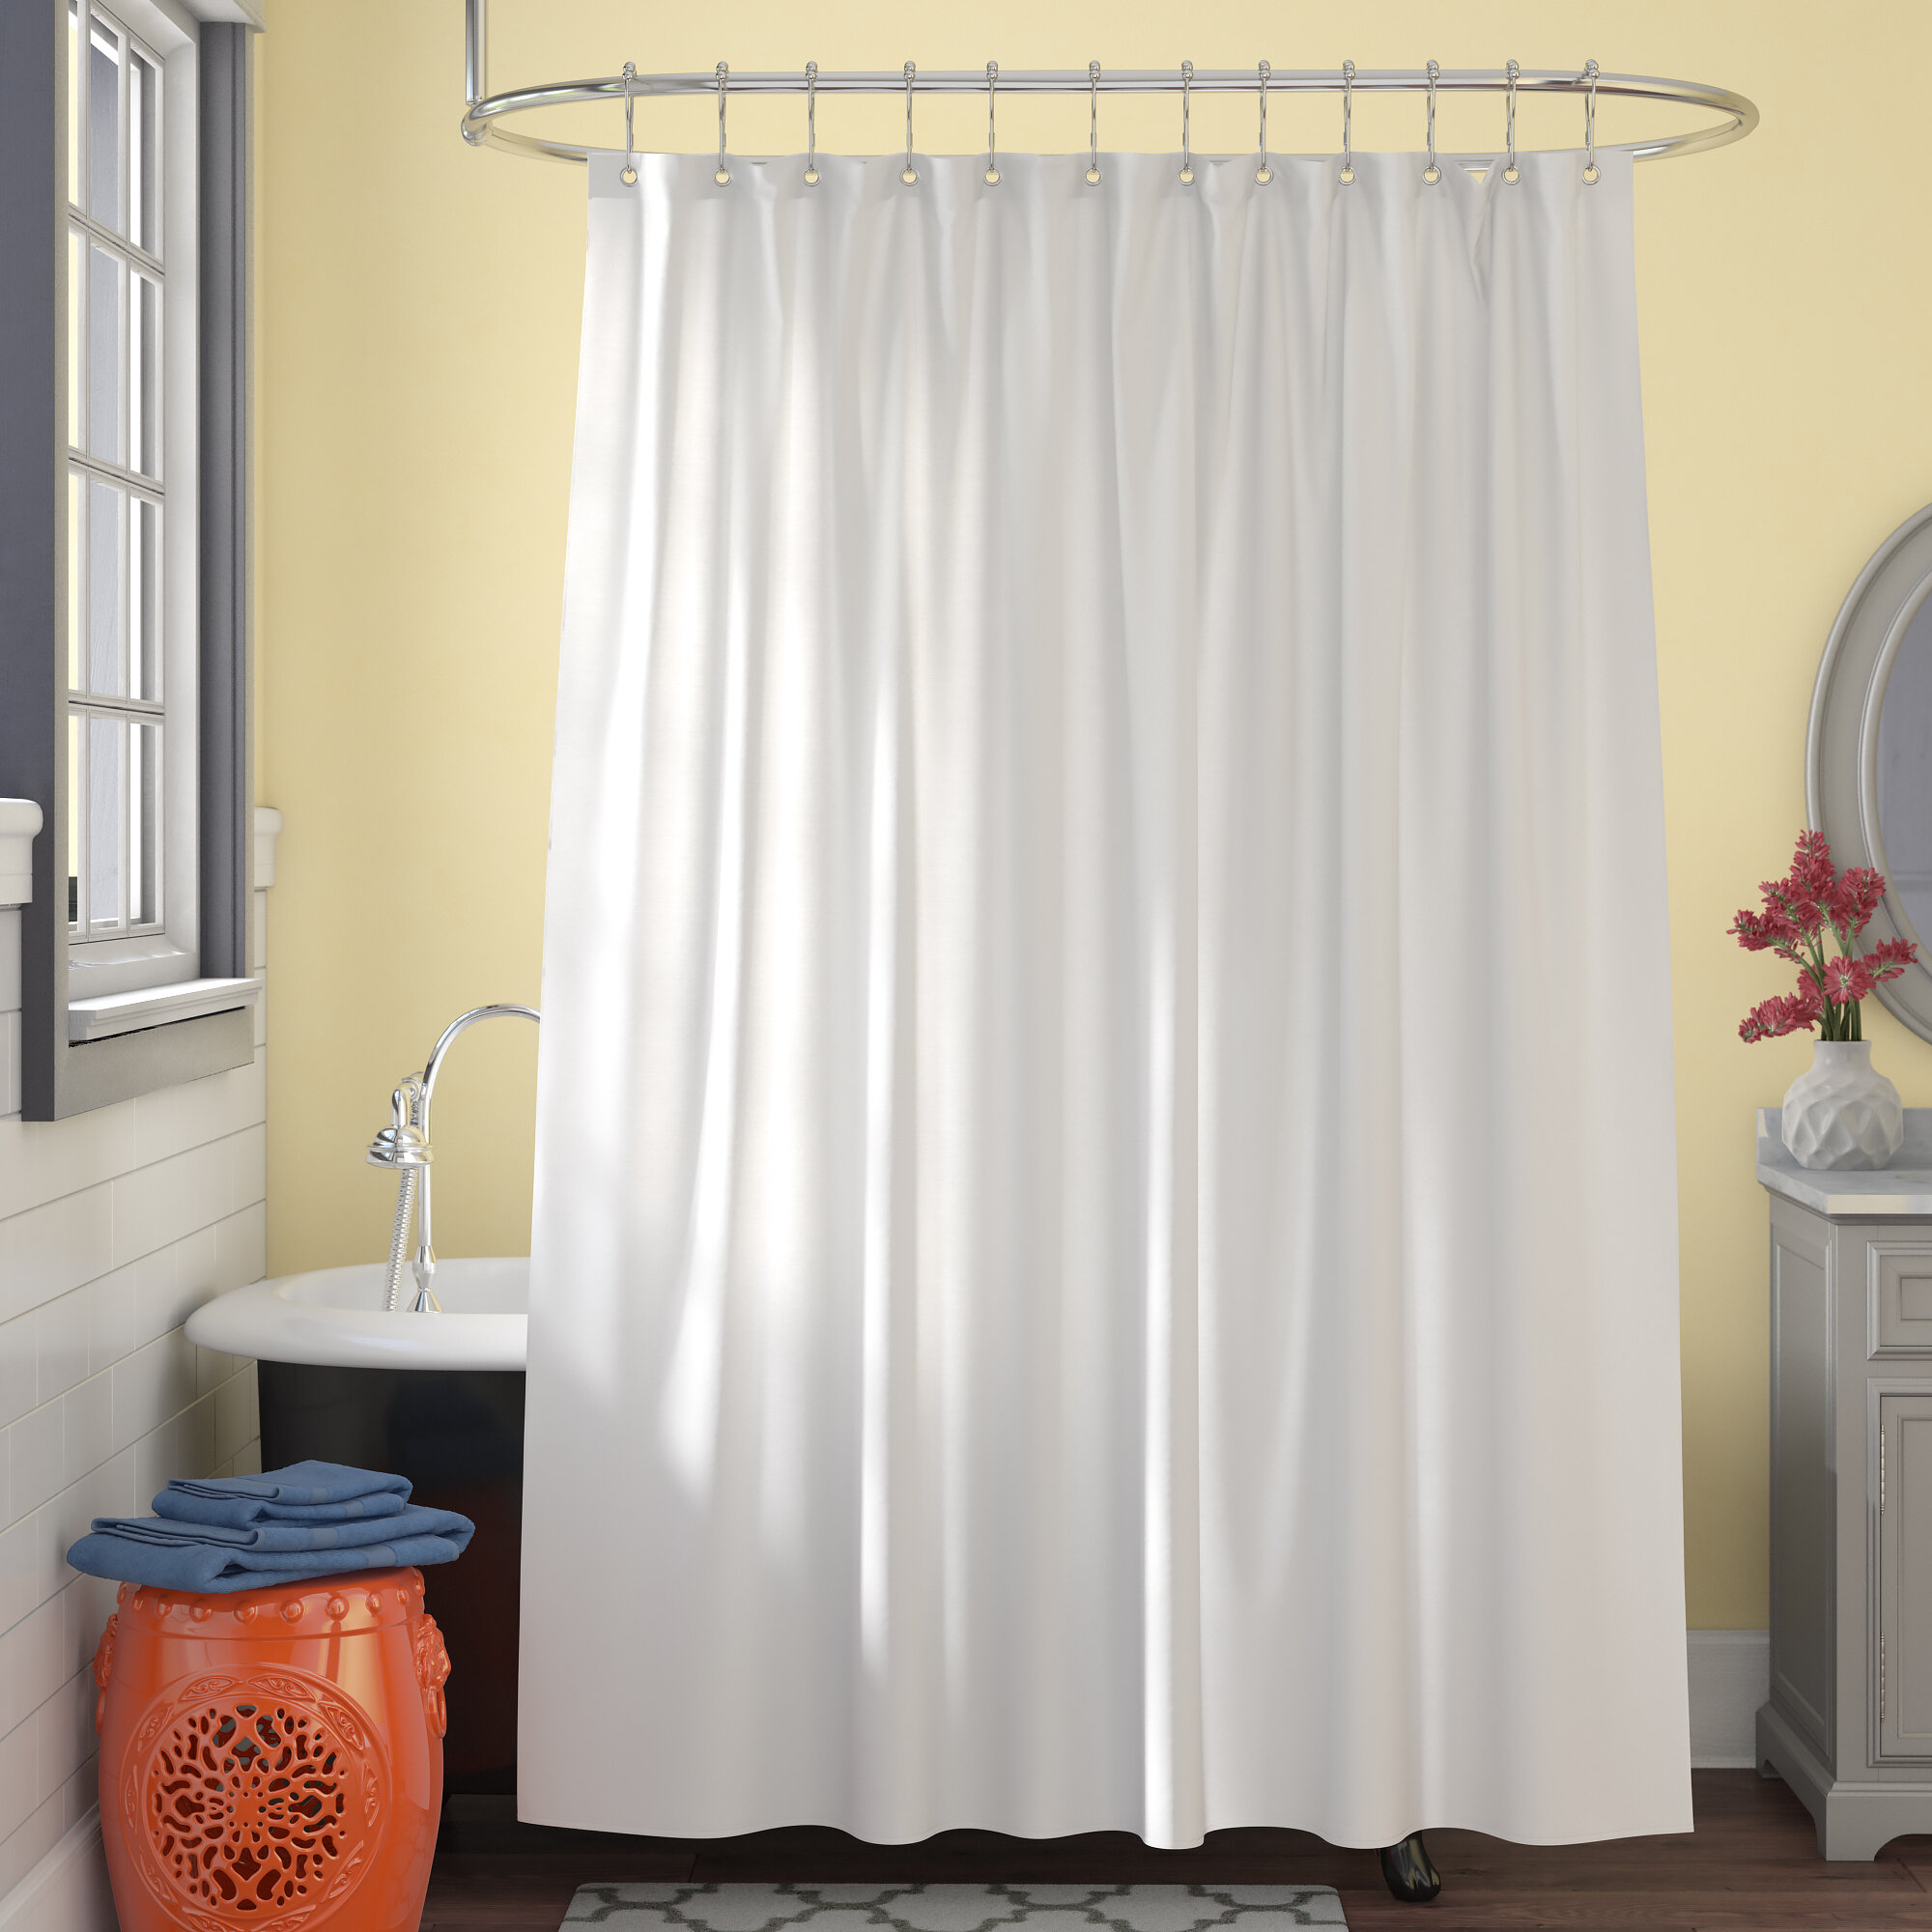 Wimaha Fabric Shower Curtain Liner-Water Resistant,Machine Washable Brand New X2 